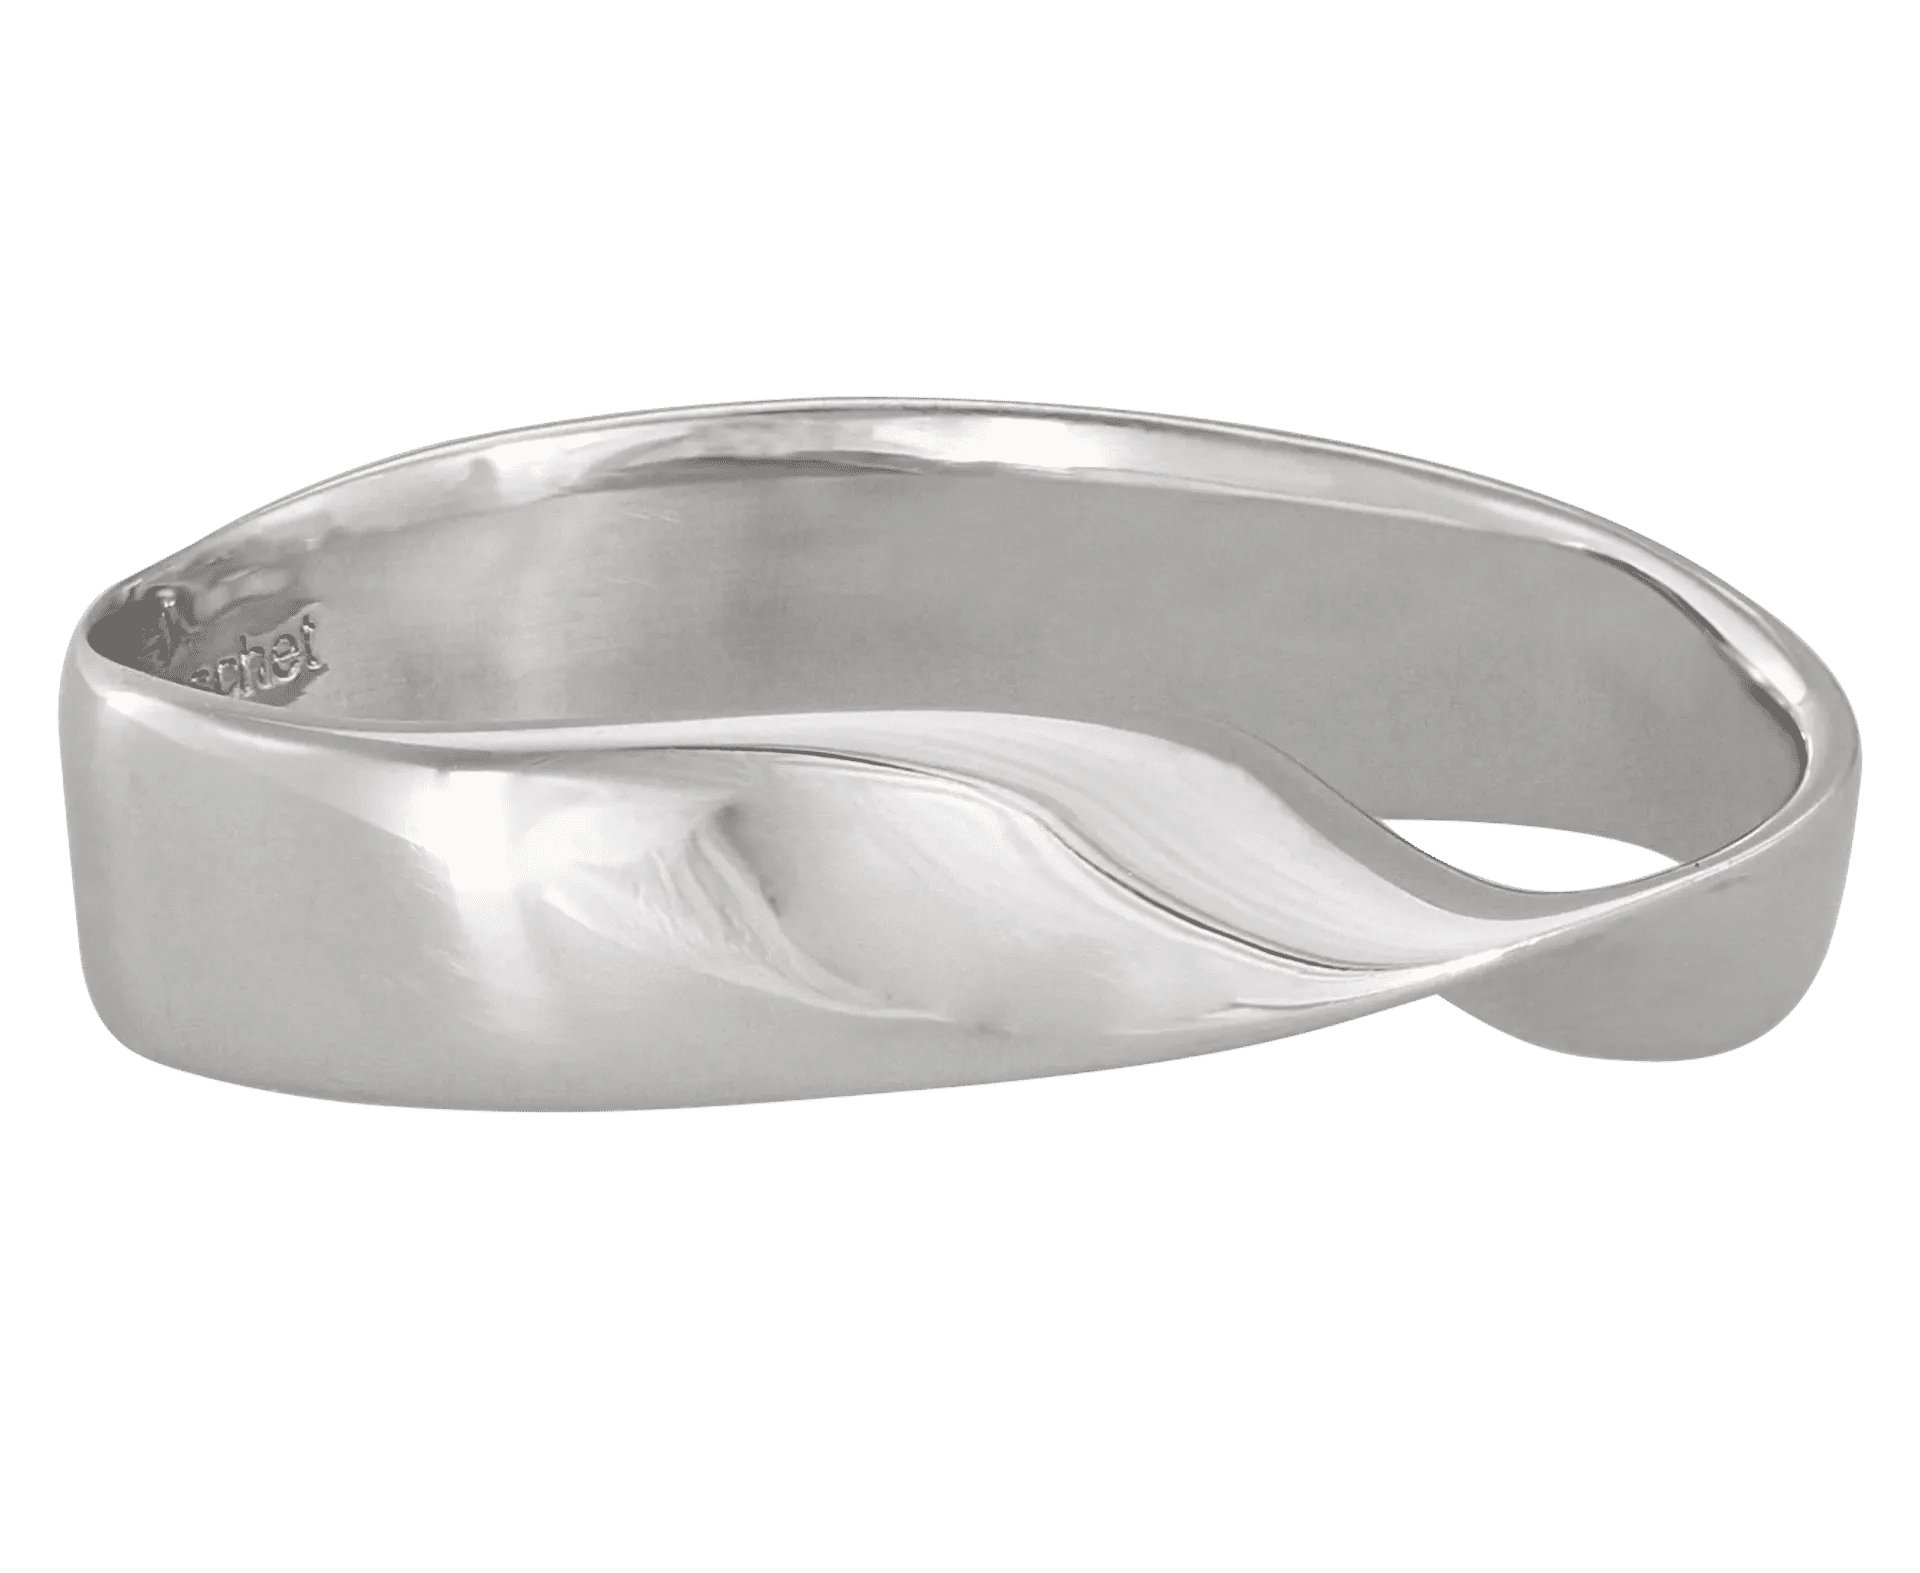 Side image of the White Gold Ribbon Ring designed by Michèle Baschet